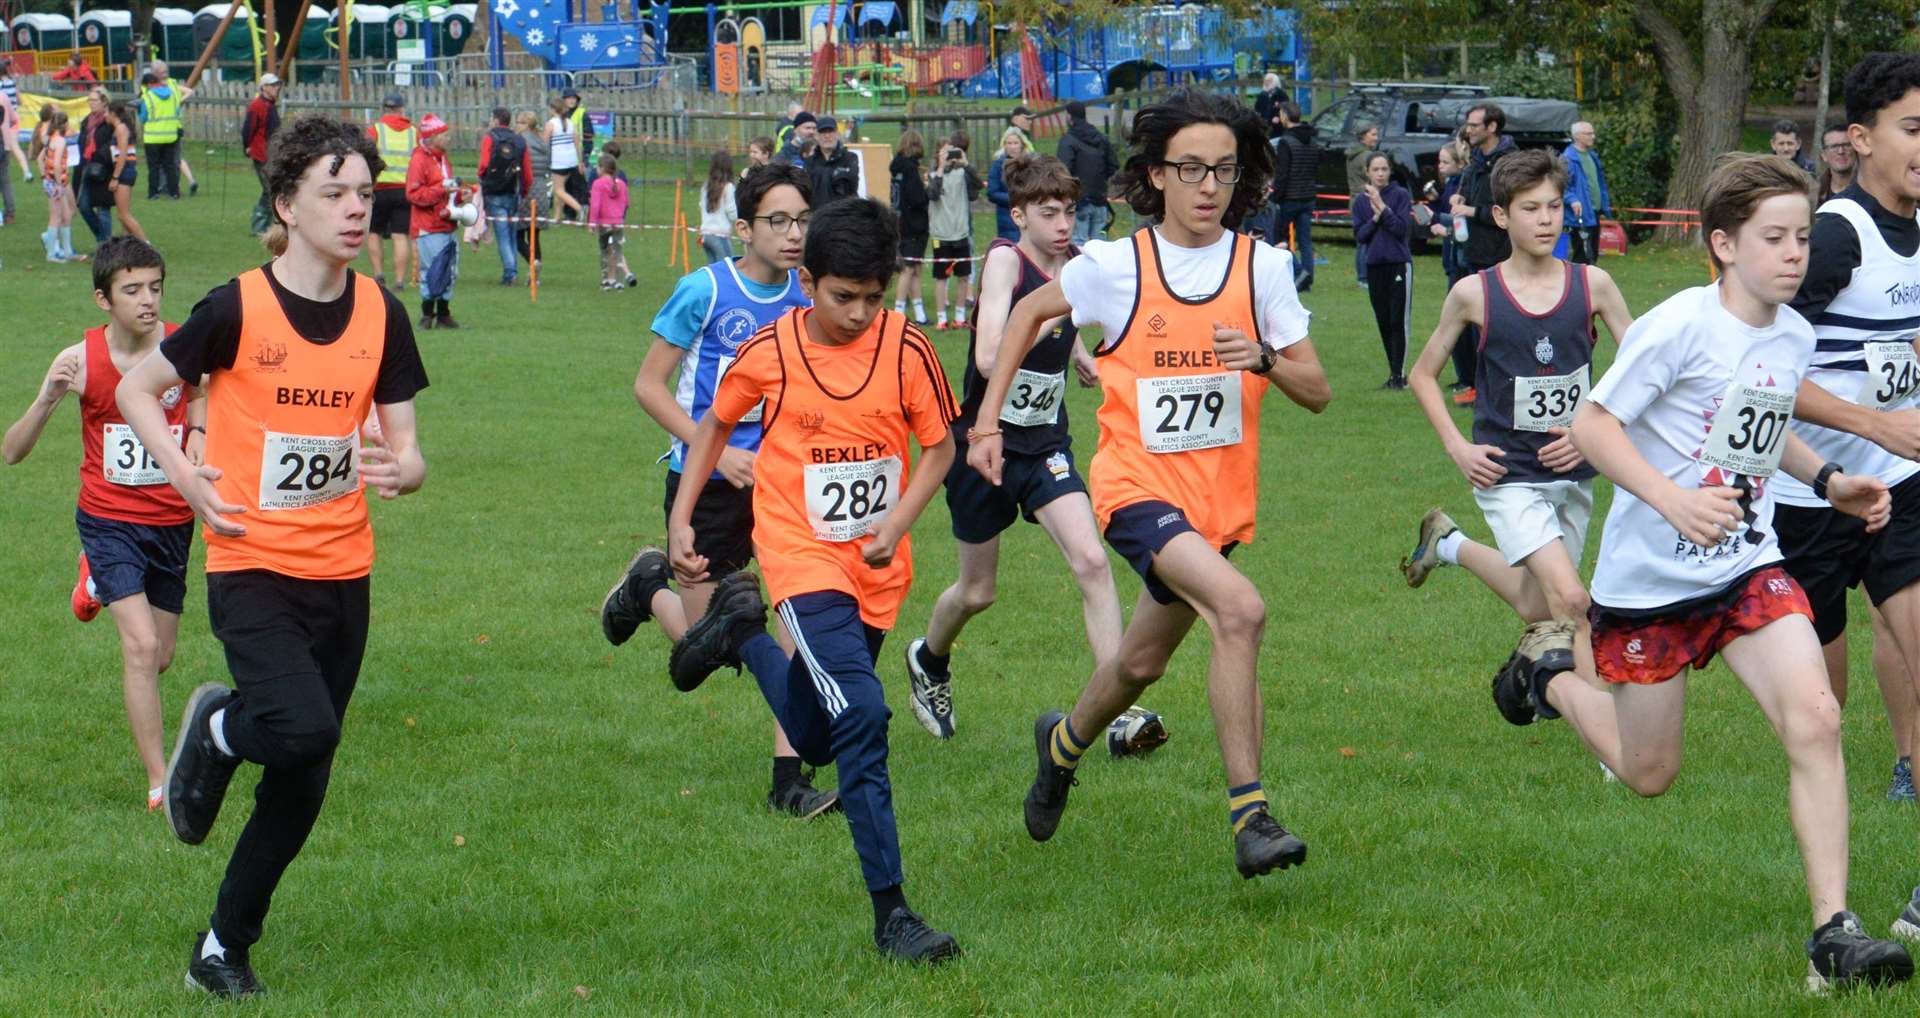 Bexley AC trio No. 284 Fredrick Todd, No. 282 Aryaan Sahota and No. 279 Andrei Anghel in the under-15 boys' race. Picture: Chris Davey (52348032)